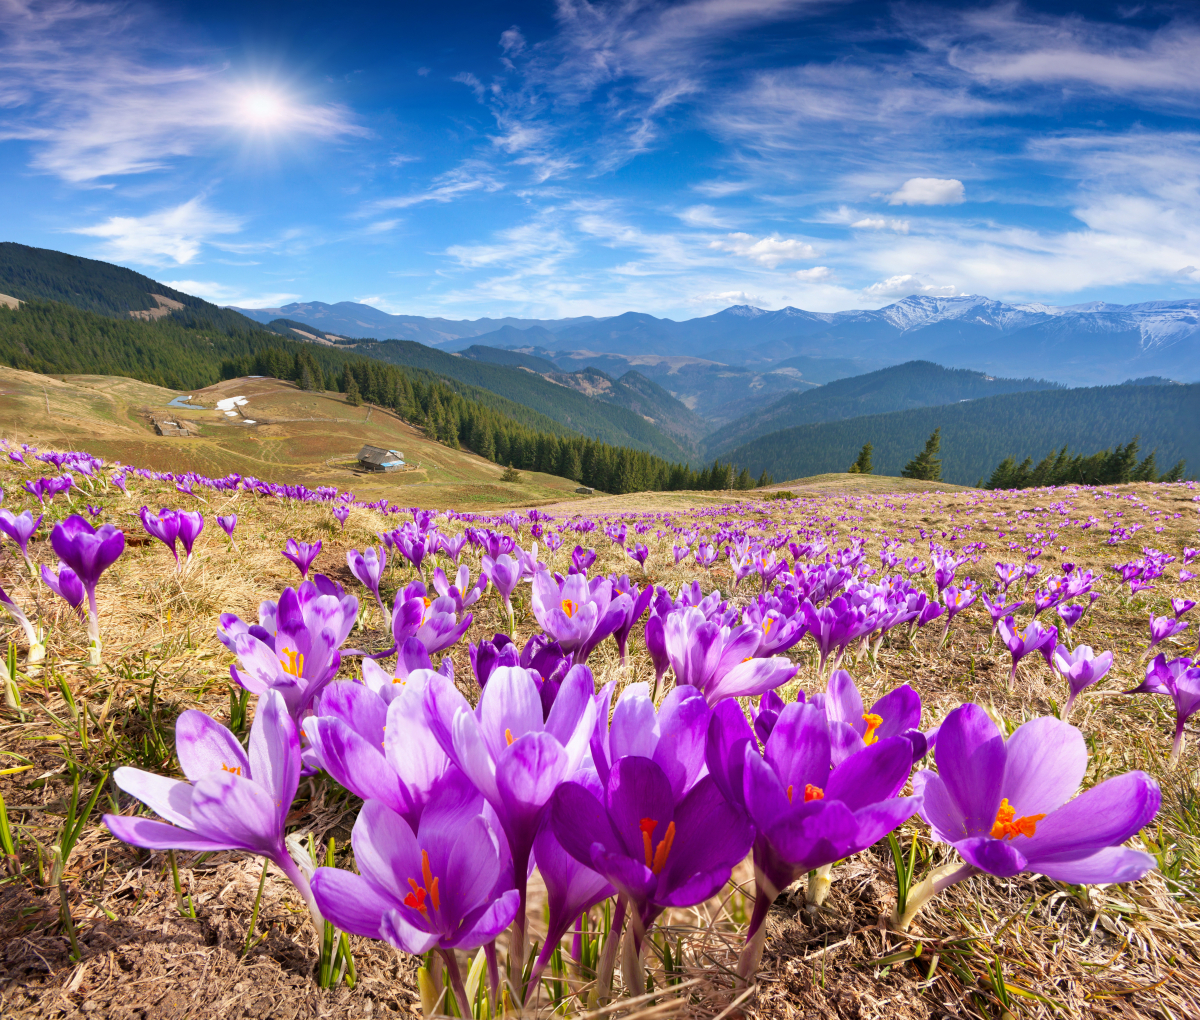 Buy Landscapes wall murals & wallpaper Violet Snowdrops In The Mountains Art. No: 10000018152